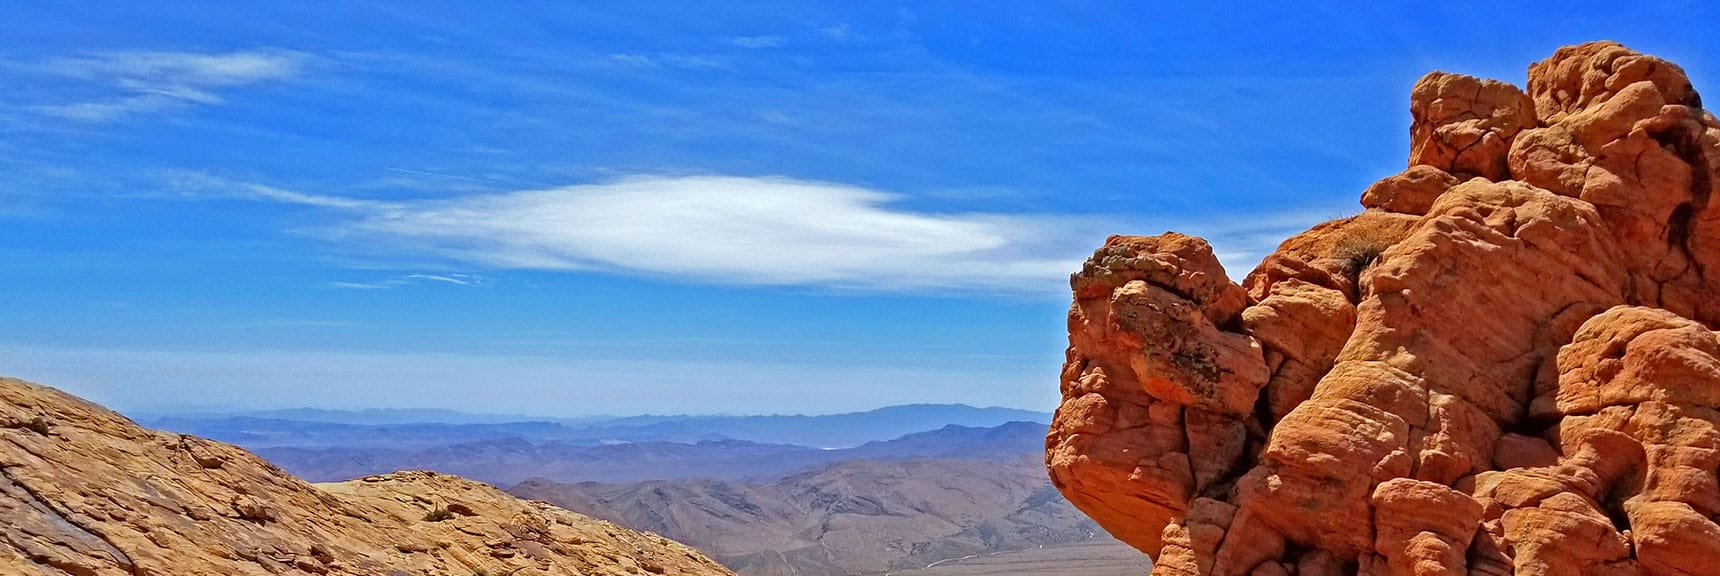 View South from Quiet Rest Spot Shielded by Beautiful Rock Formation | Windy Peak | Rainbow Mountain Wilderness, Nevada